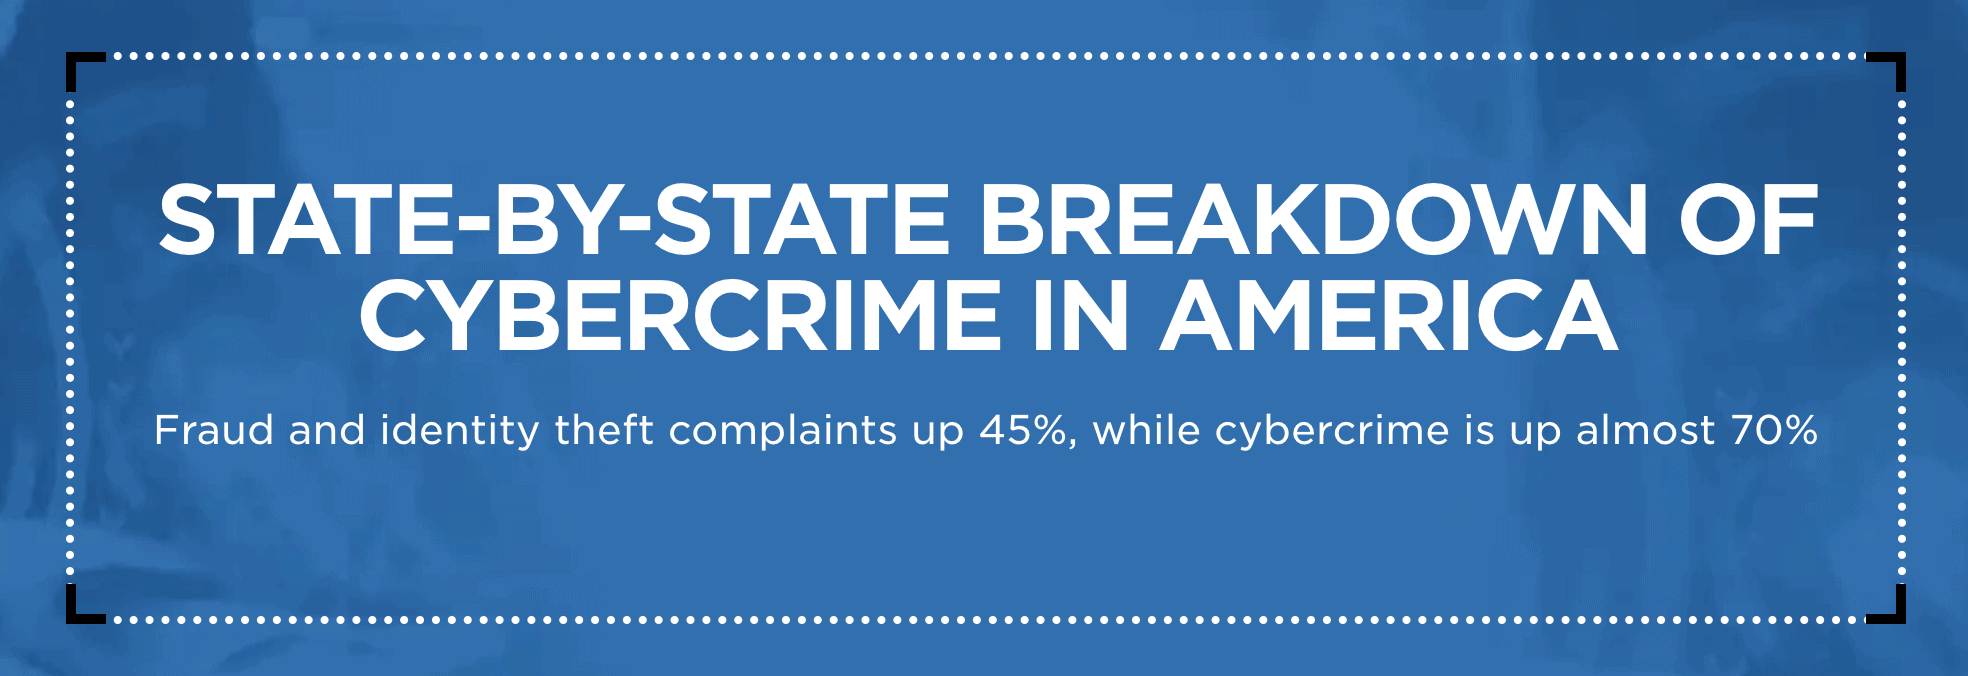 State-by-State Breakdown of Cybercrime in America